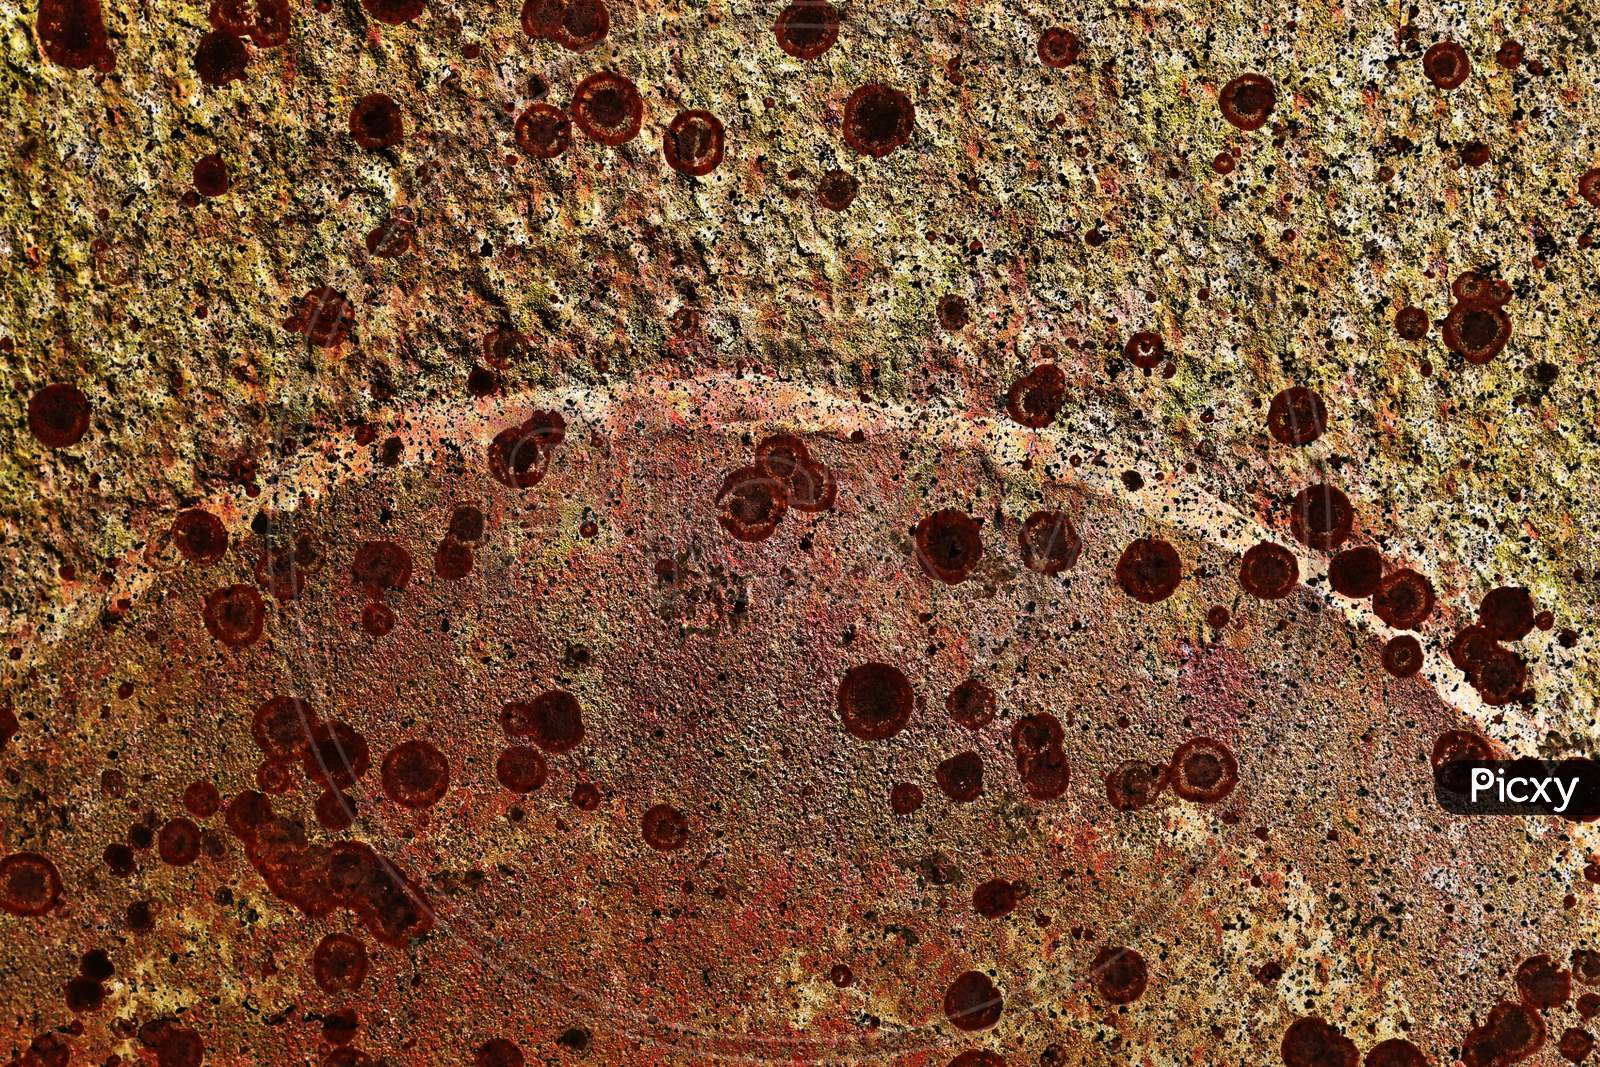 Rusty metal textures on aged and weathered walls in a detailed close up view